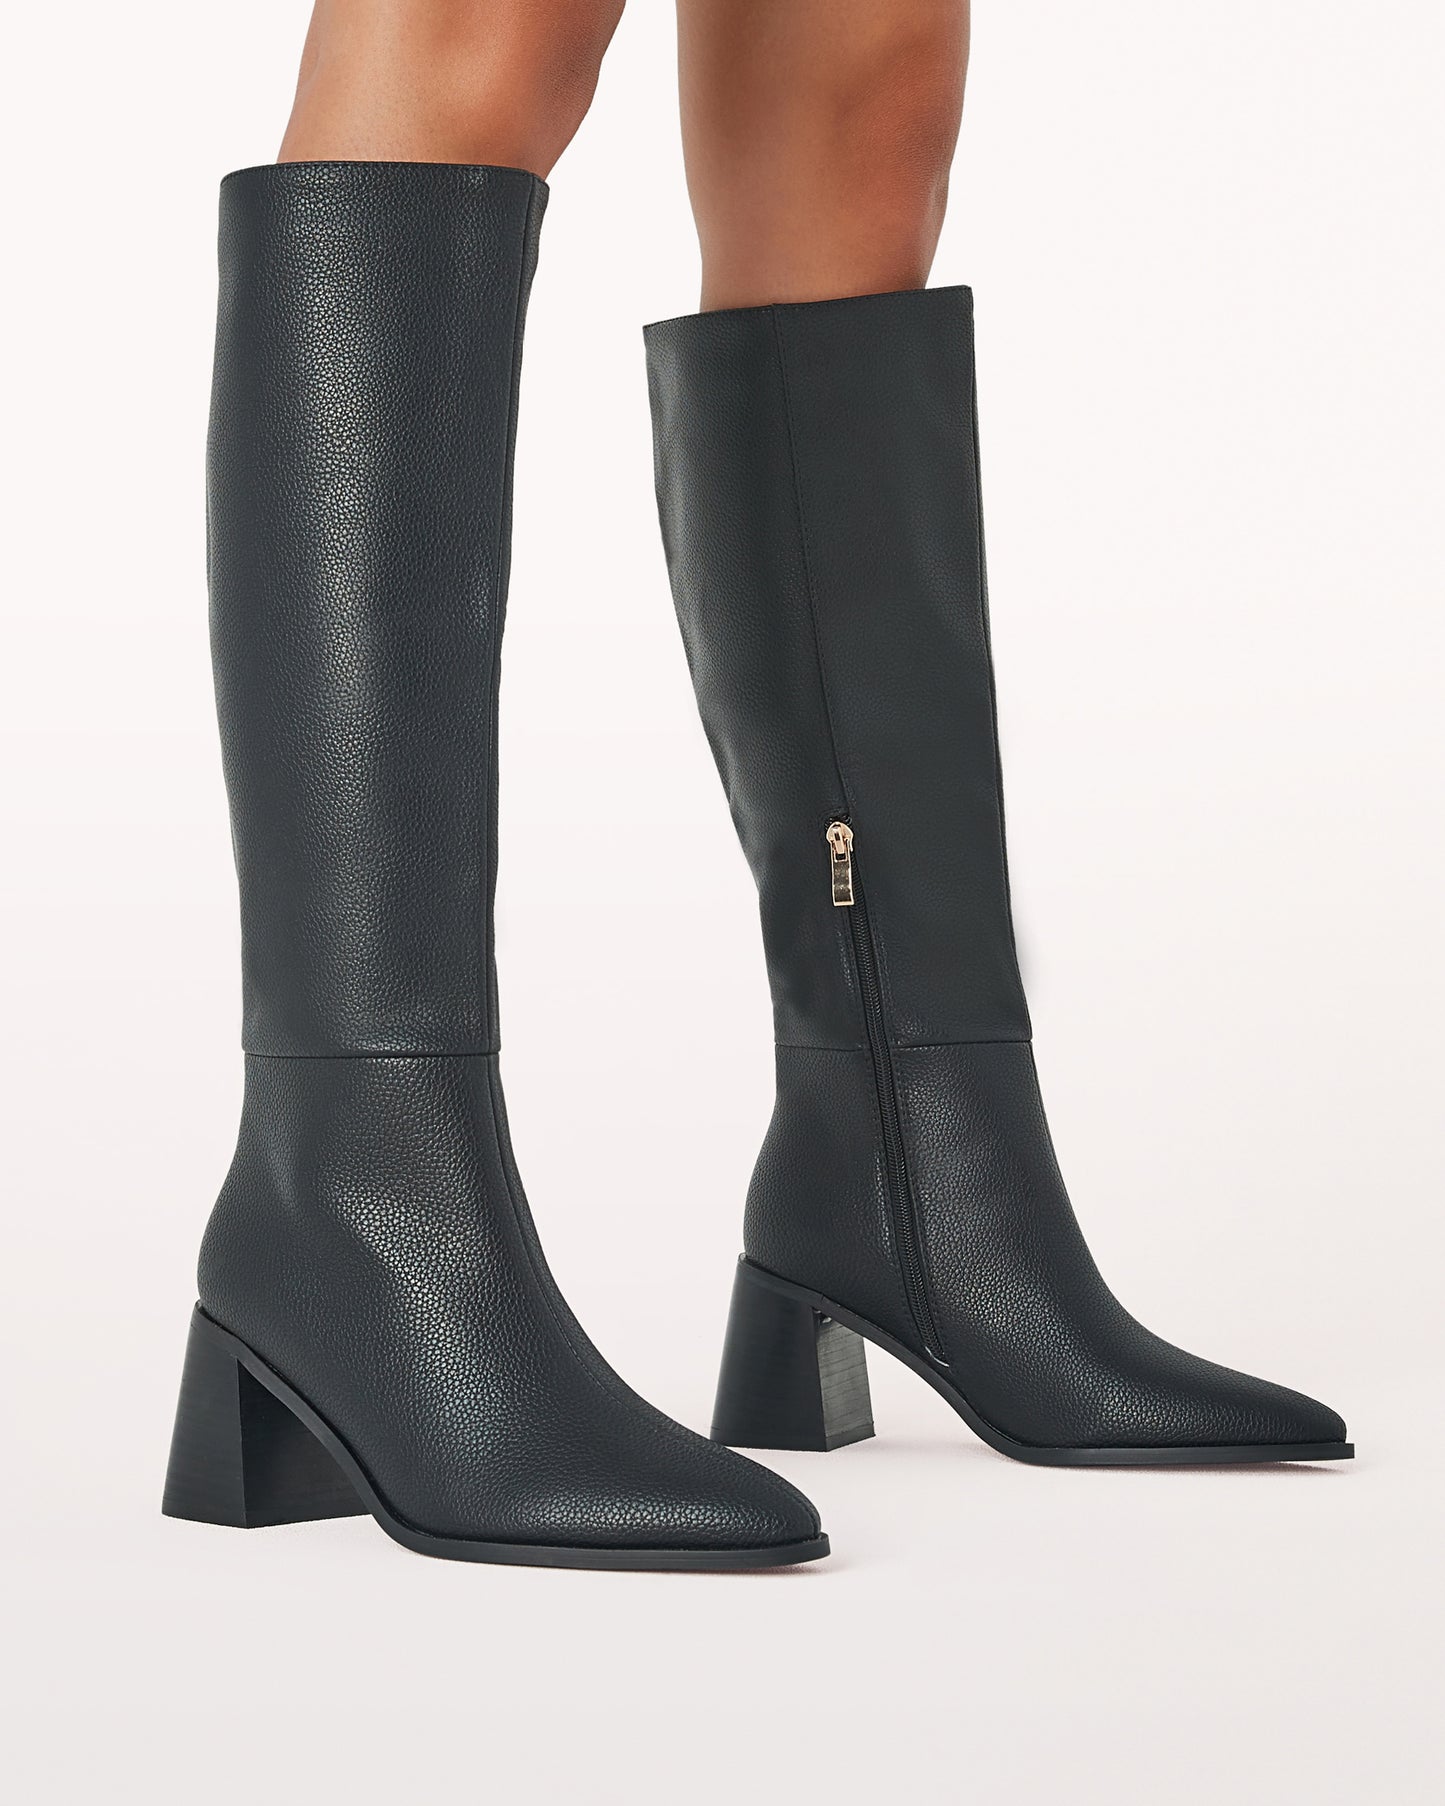 Tall black faux leather boot with a block heel